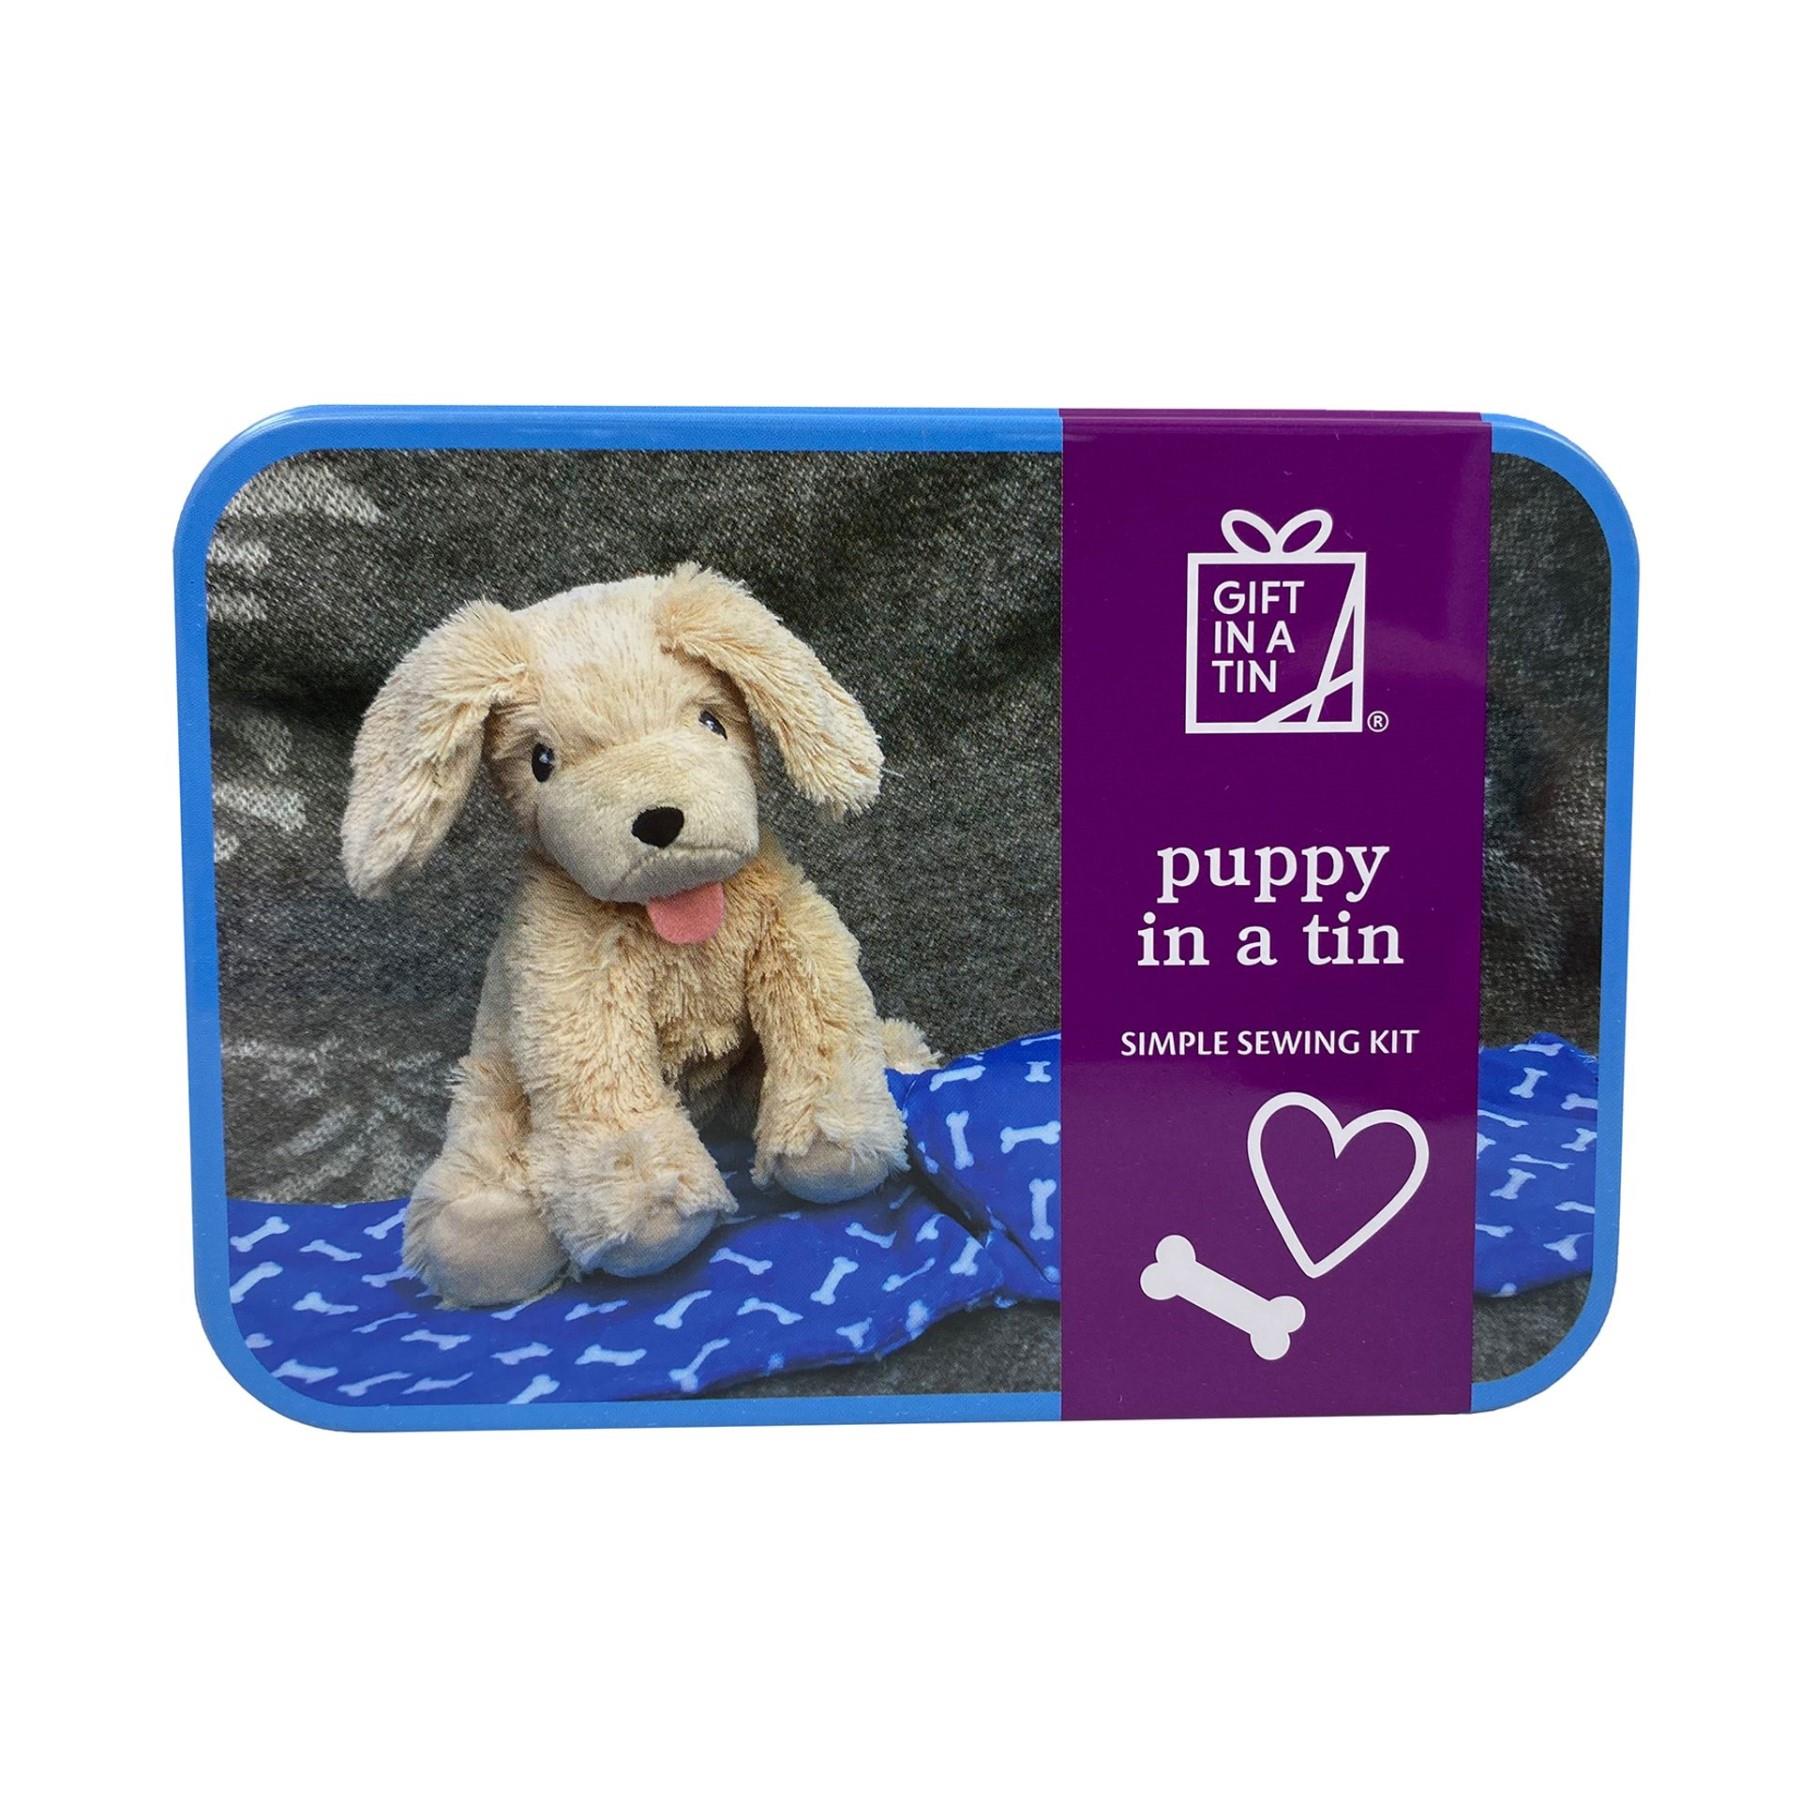 Gift in A Tin Craft / Activity Set Age 6+ - Puppy Sewing Kit